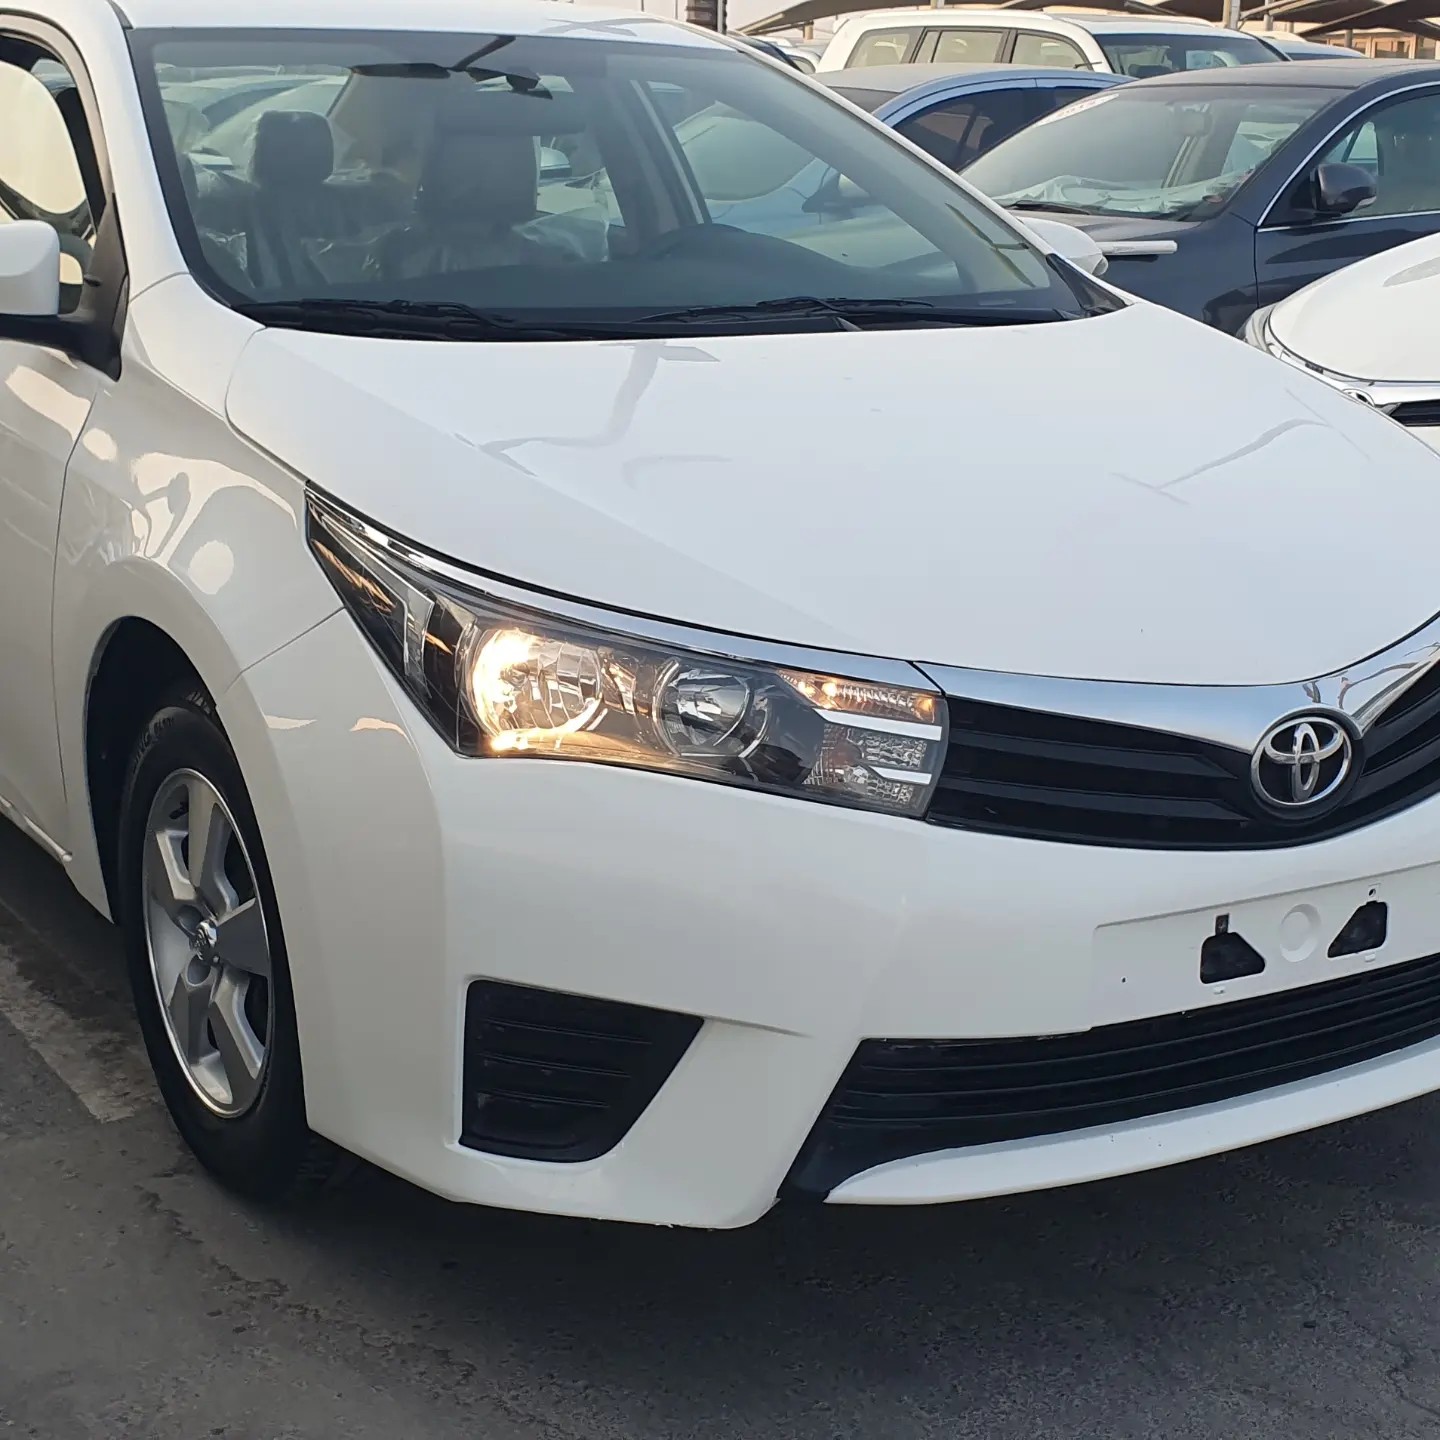 Toyota Corolla 2015 is affordable but like new